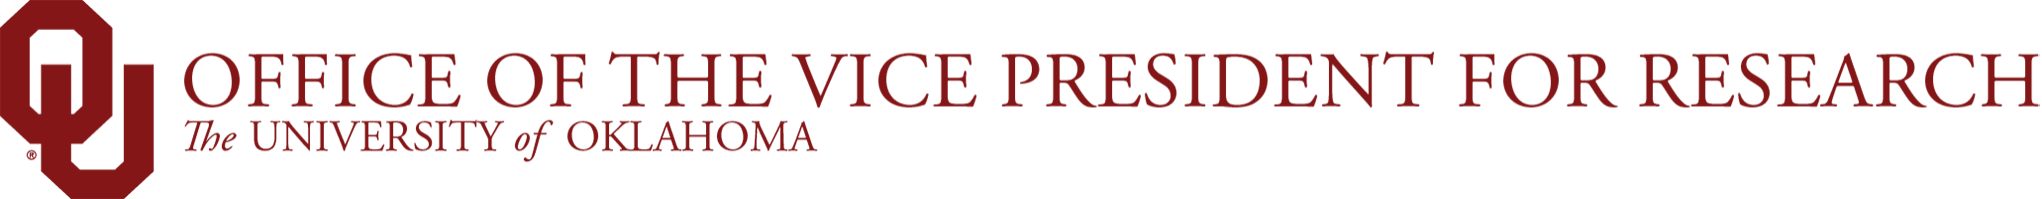 Office of the Vice President for Research, The University of Oklahoma website wordmark